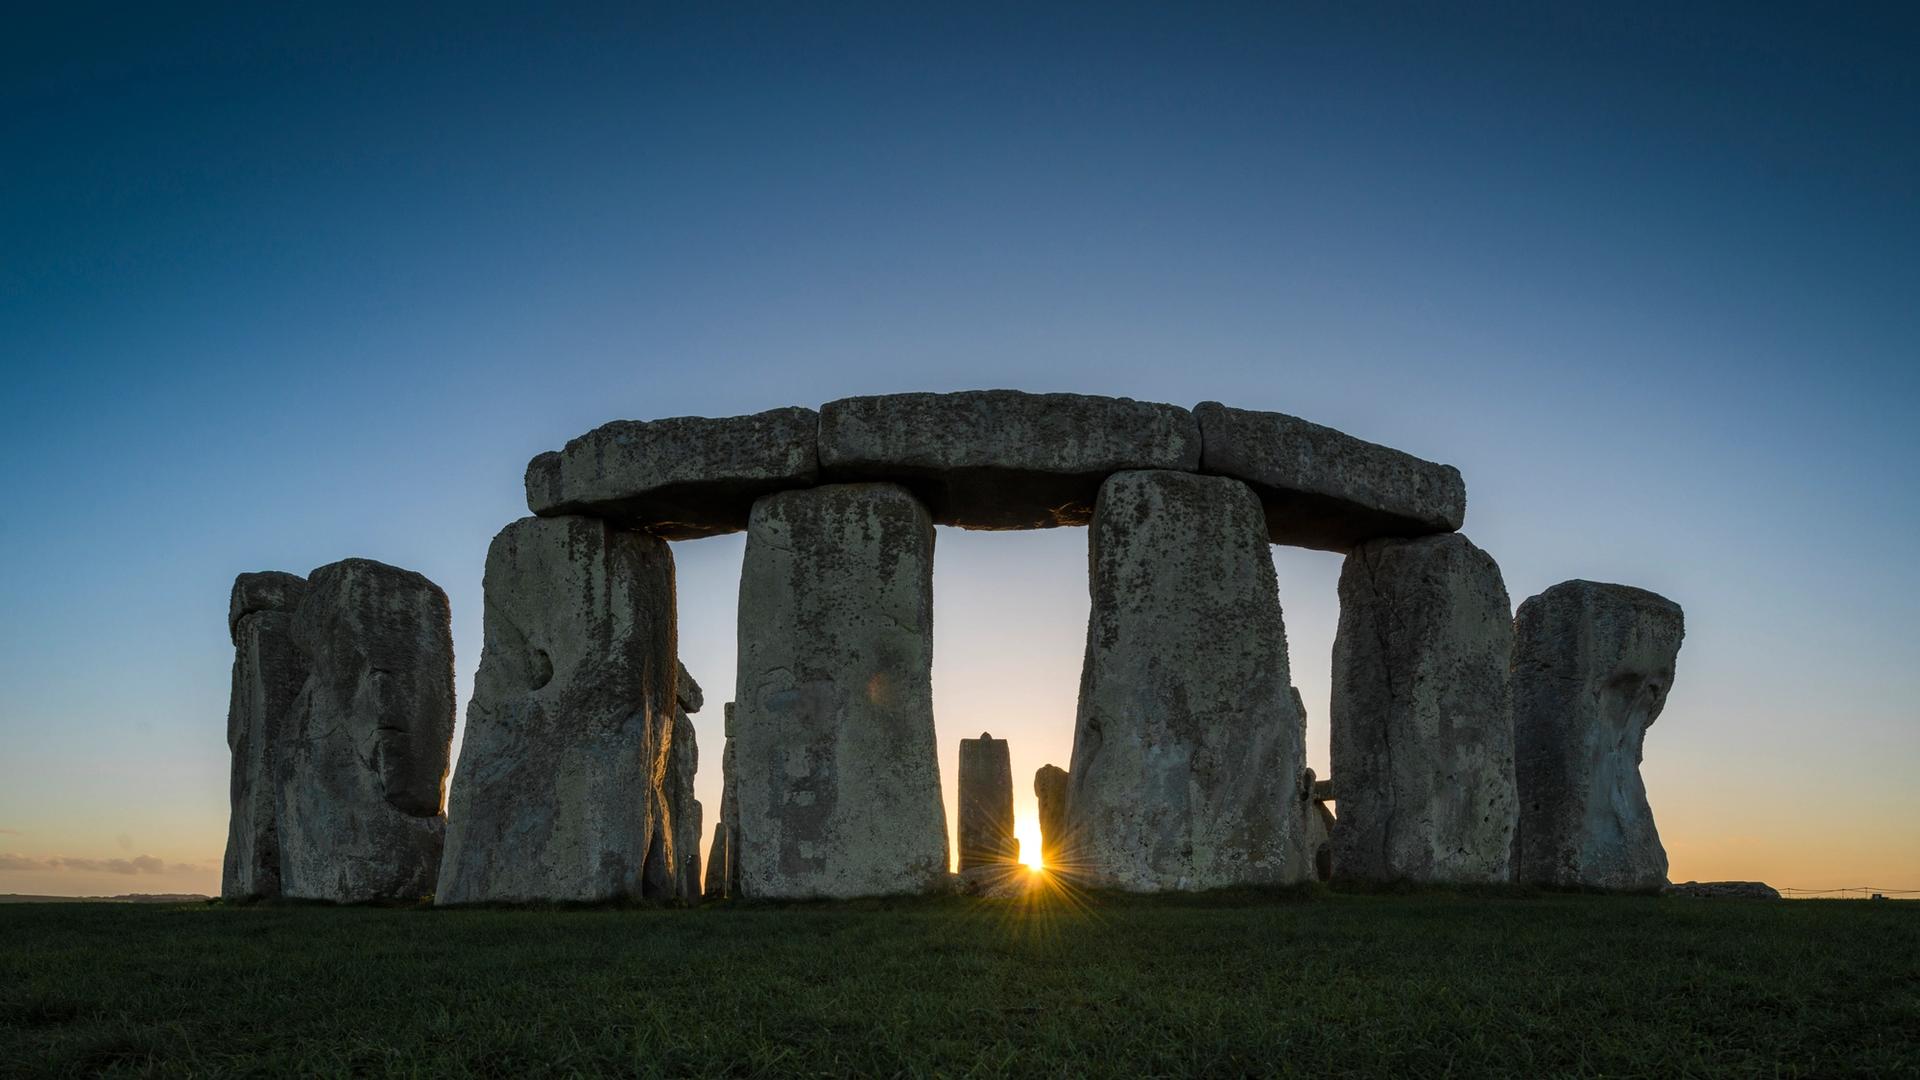 Although England’s Stonehenge is "one of the most recognisable sites on the planet" it still has many unknowns © English Heritage